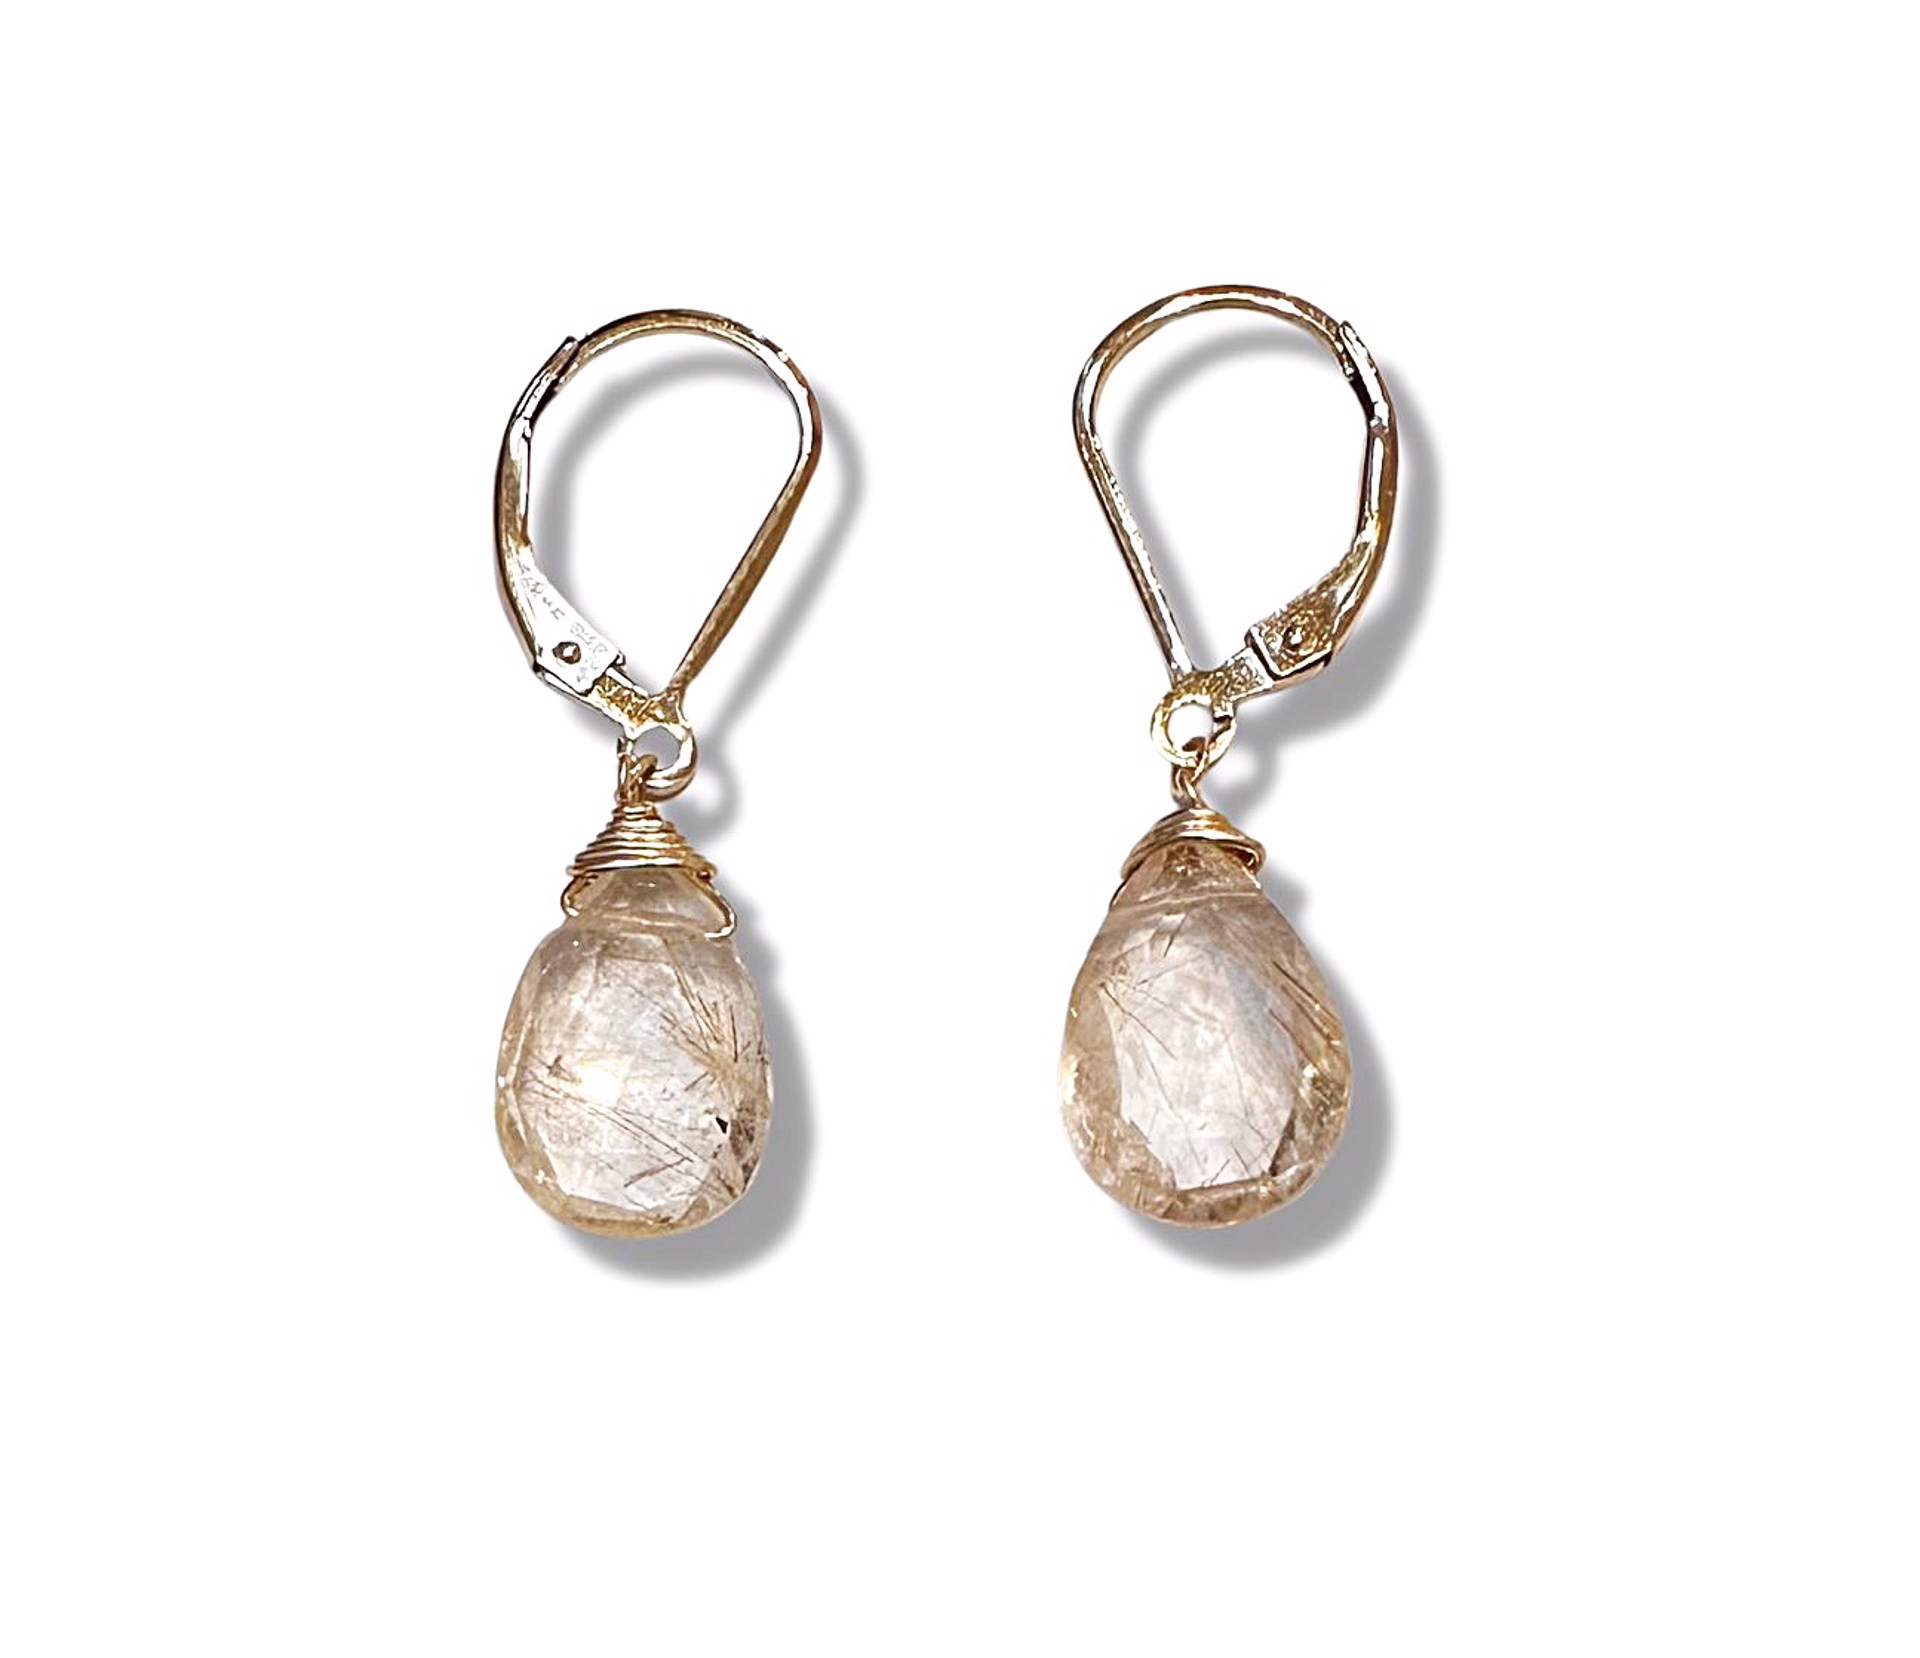 Earrings - Rutilated Quartz Drop with 14K Gold Filling by Julia Balestracci